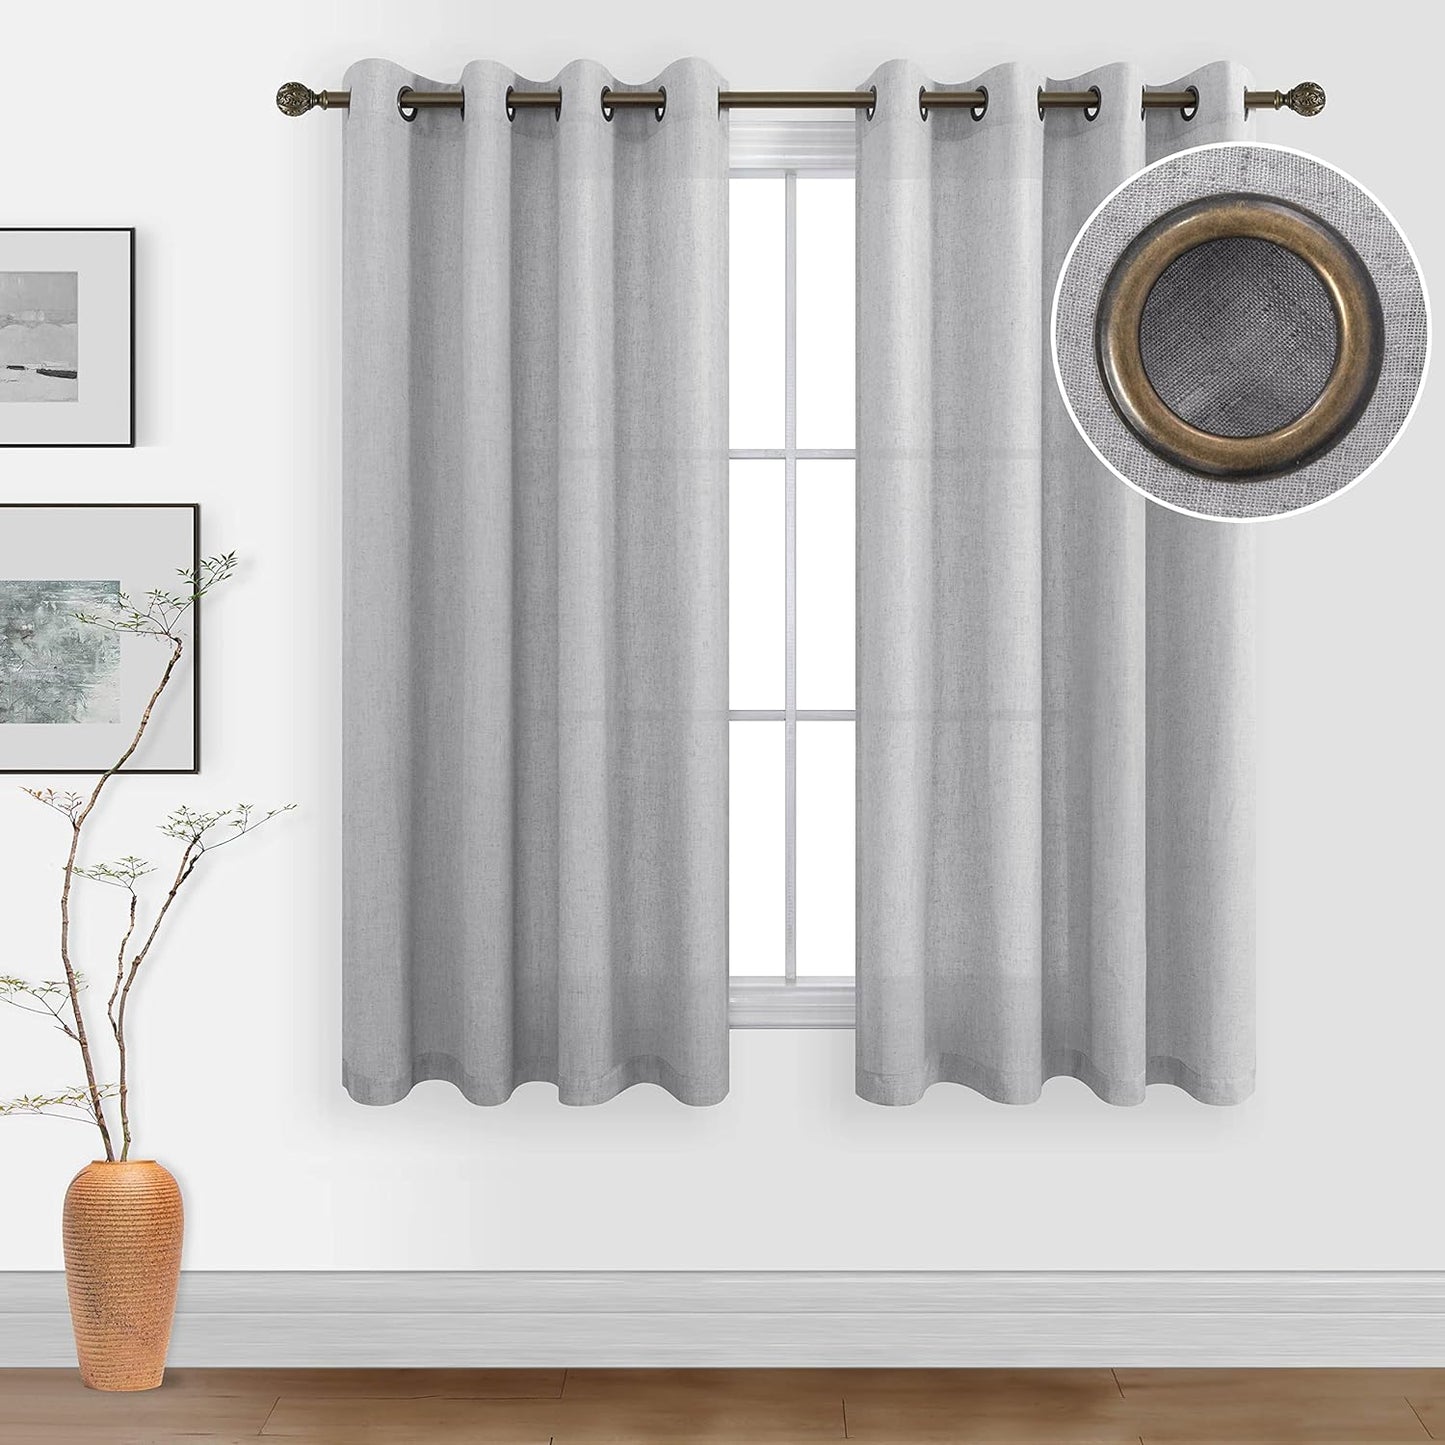 KOUFALL Beige Rustic Country Curtains for Living Room 84 Inches Long Flax Linen Bronze Grommet Tan Sand Color Solid Faux Linen Curtains for Bedroom Sliding Glass Patio Door 2 Panels  KOUFALL TEXTILE Grey 52X45 